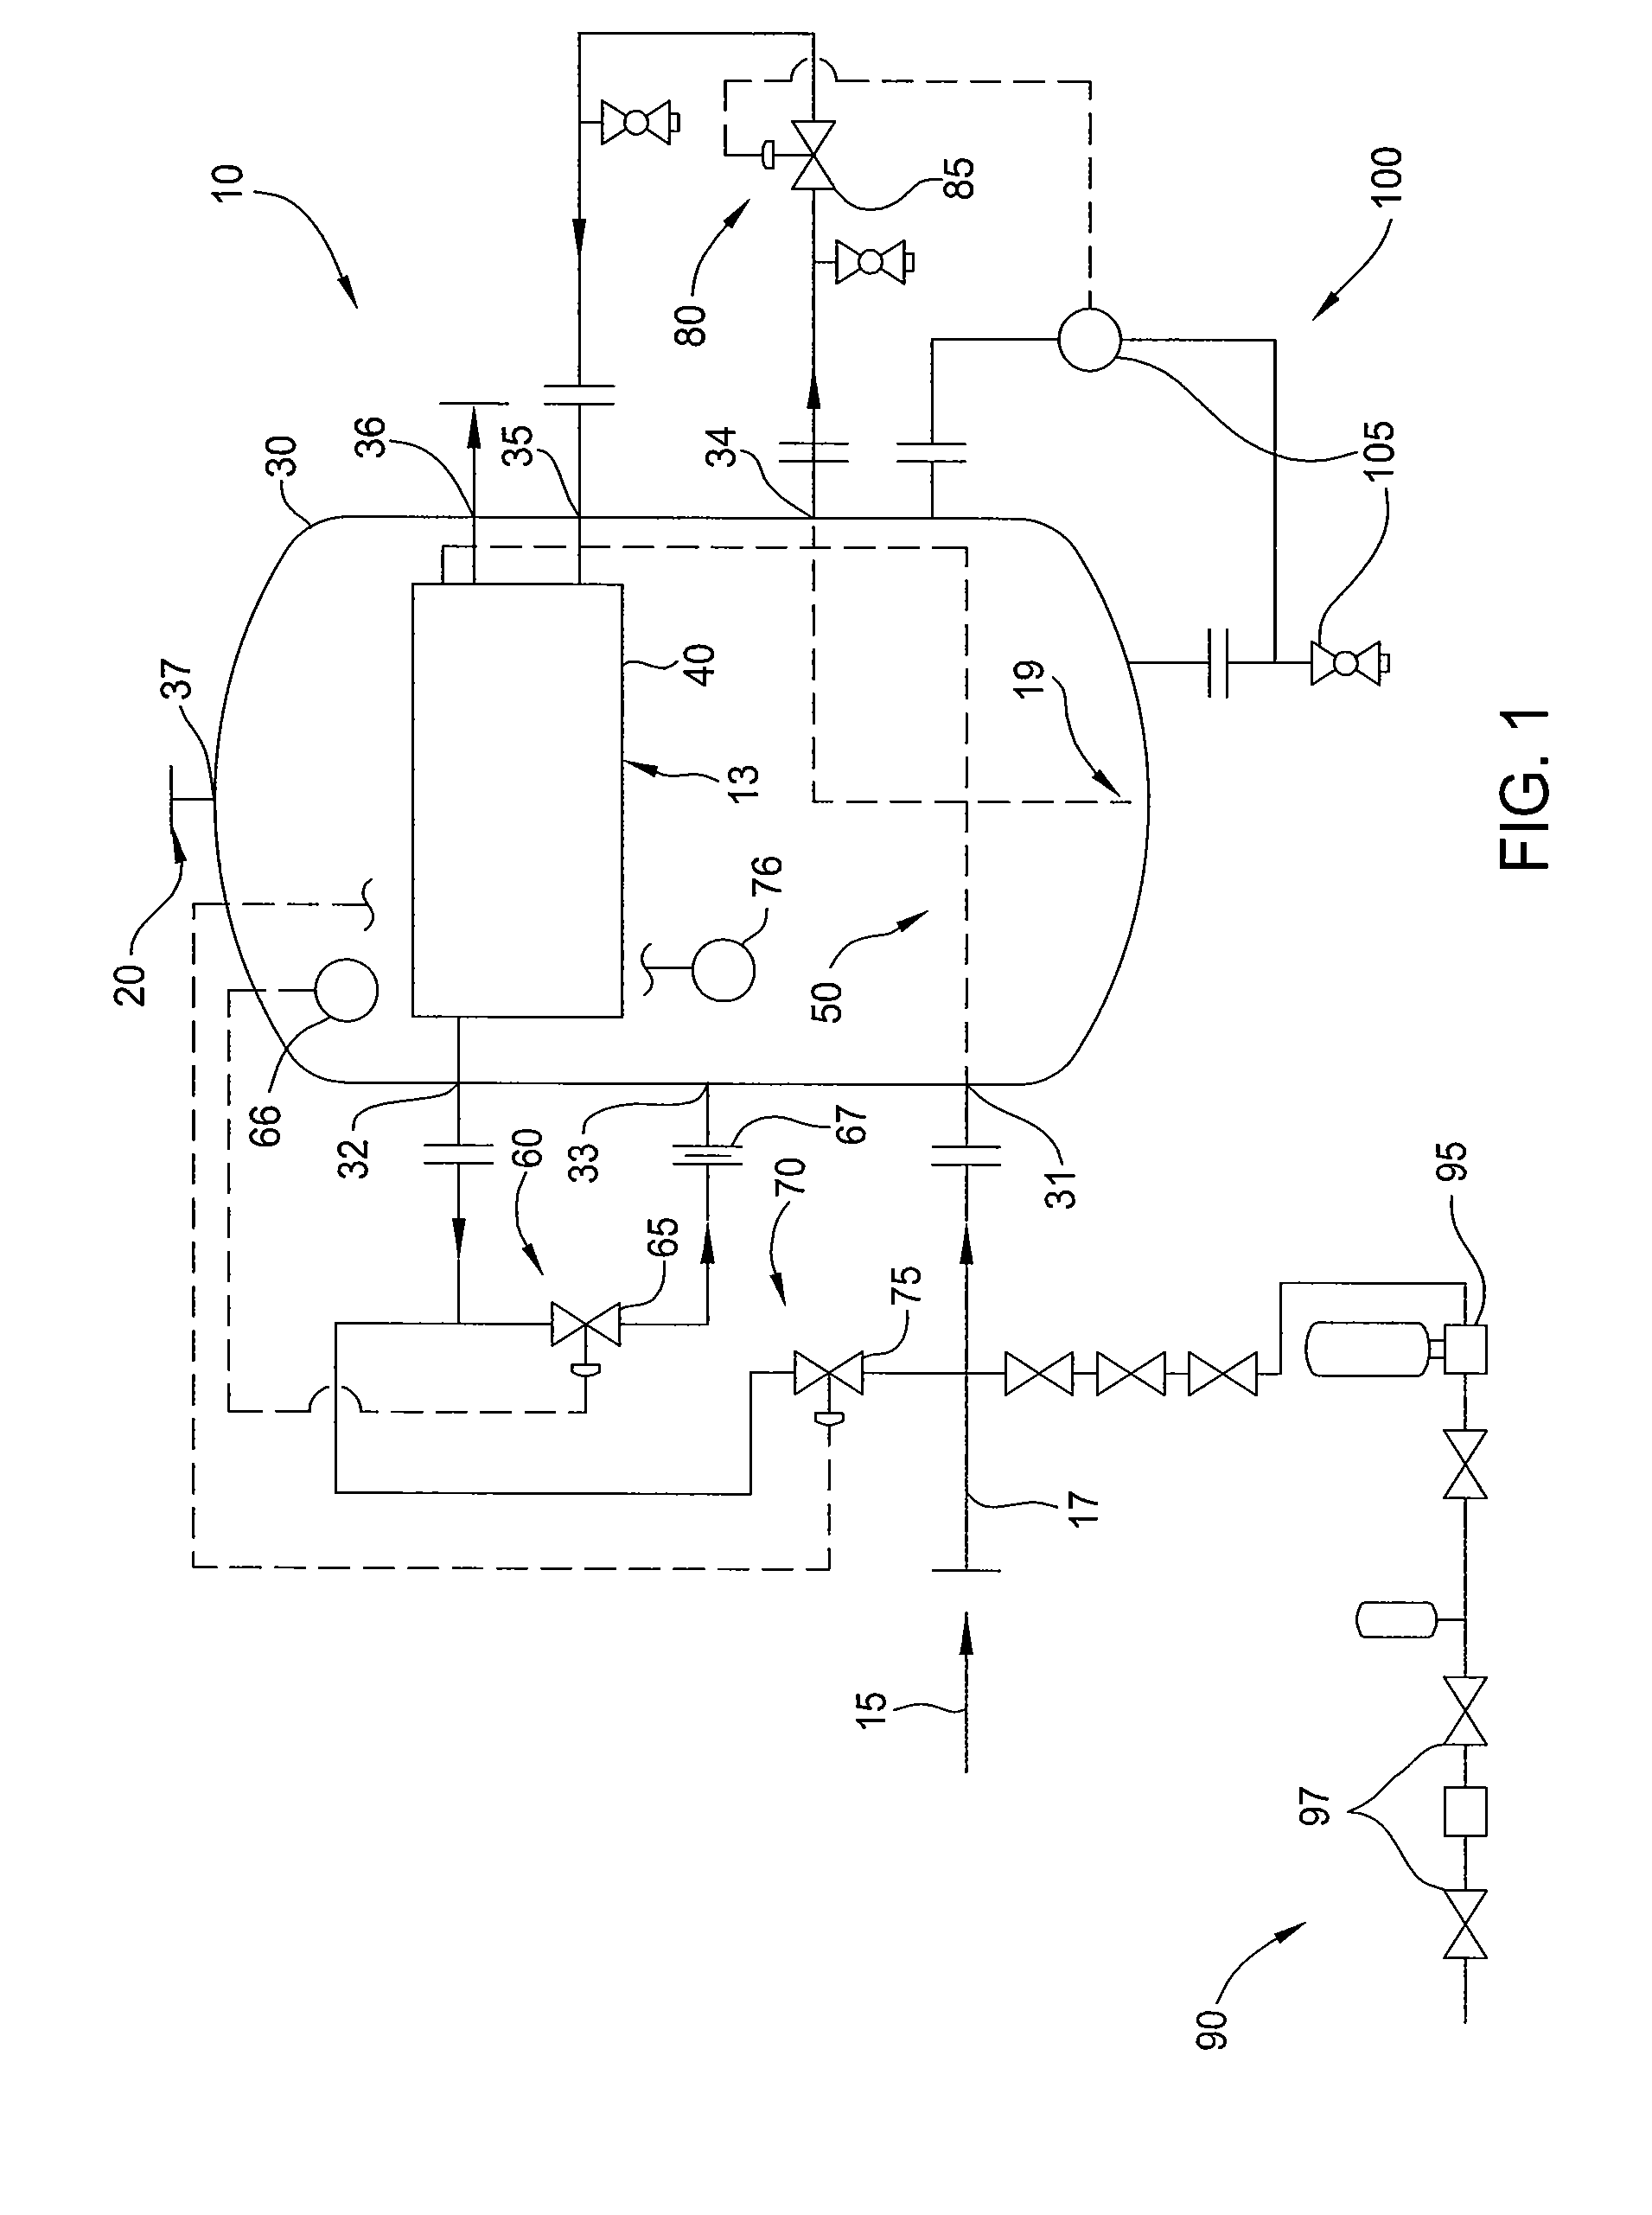 Combined multi-stream heat exchanger and conditioner/control unit